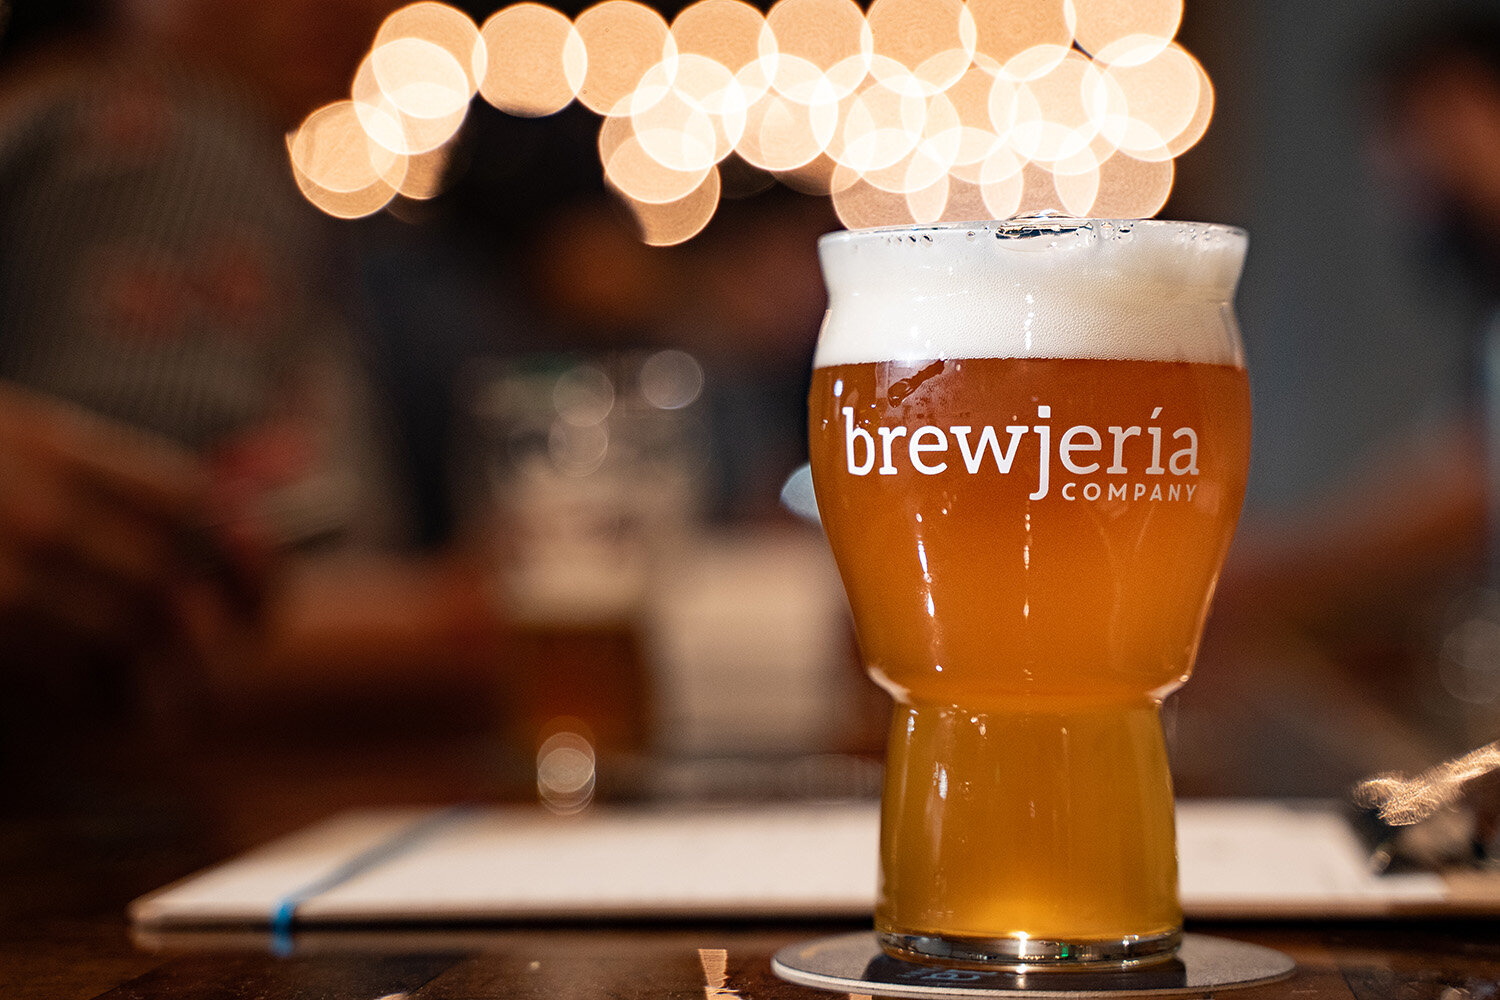 Brewjeria Company brewery from Los Angeles opening a new location in Chula Vista featuring a draft beer on their bar counter